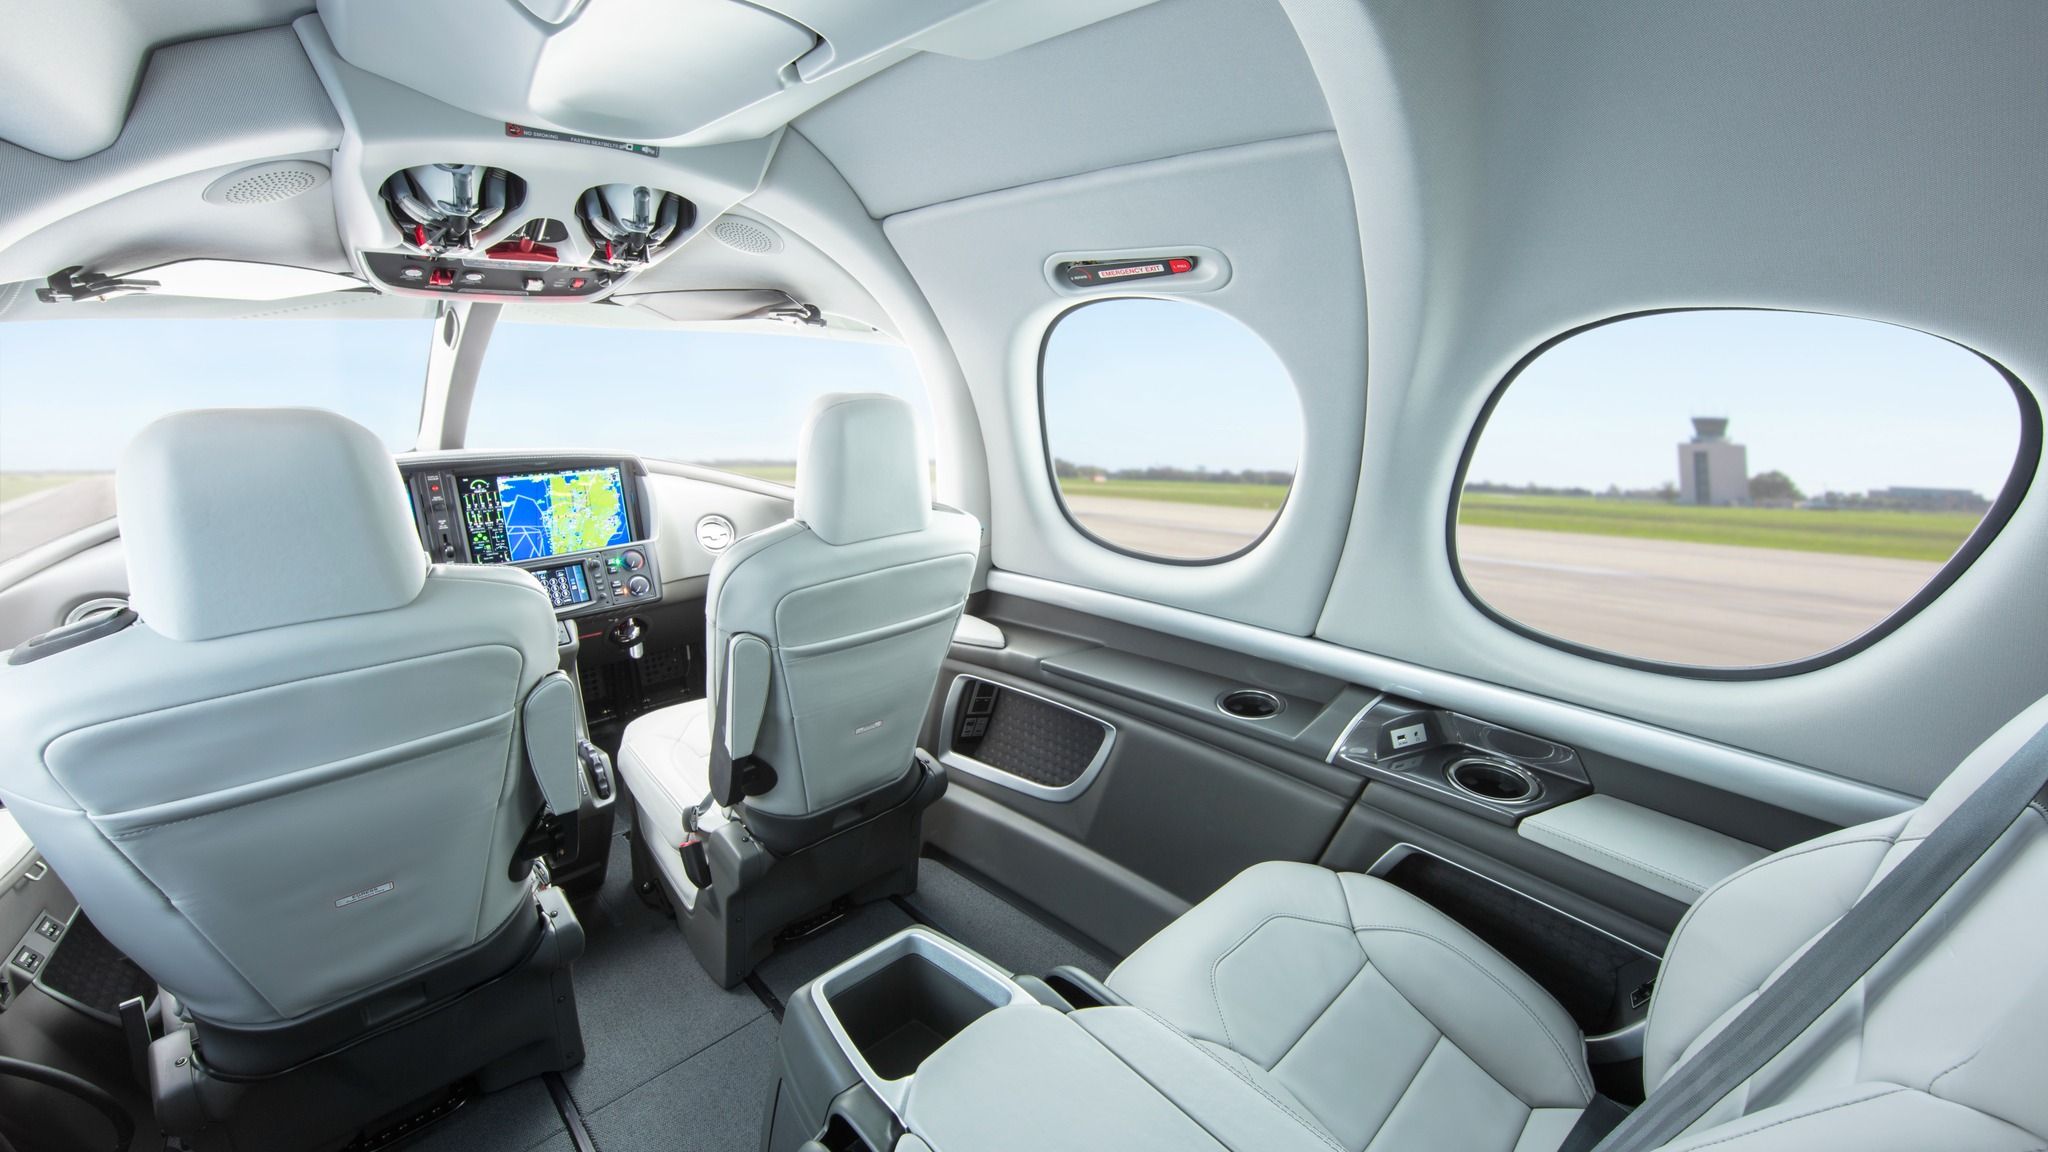 Inside the cabin of a Cirrus Vision Jet.